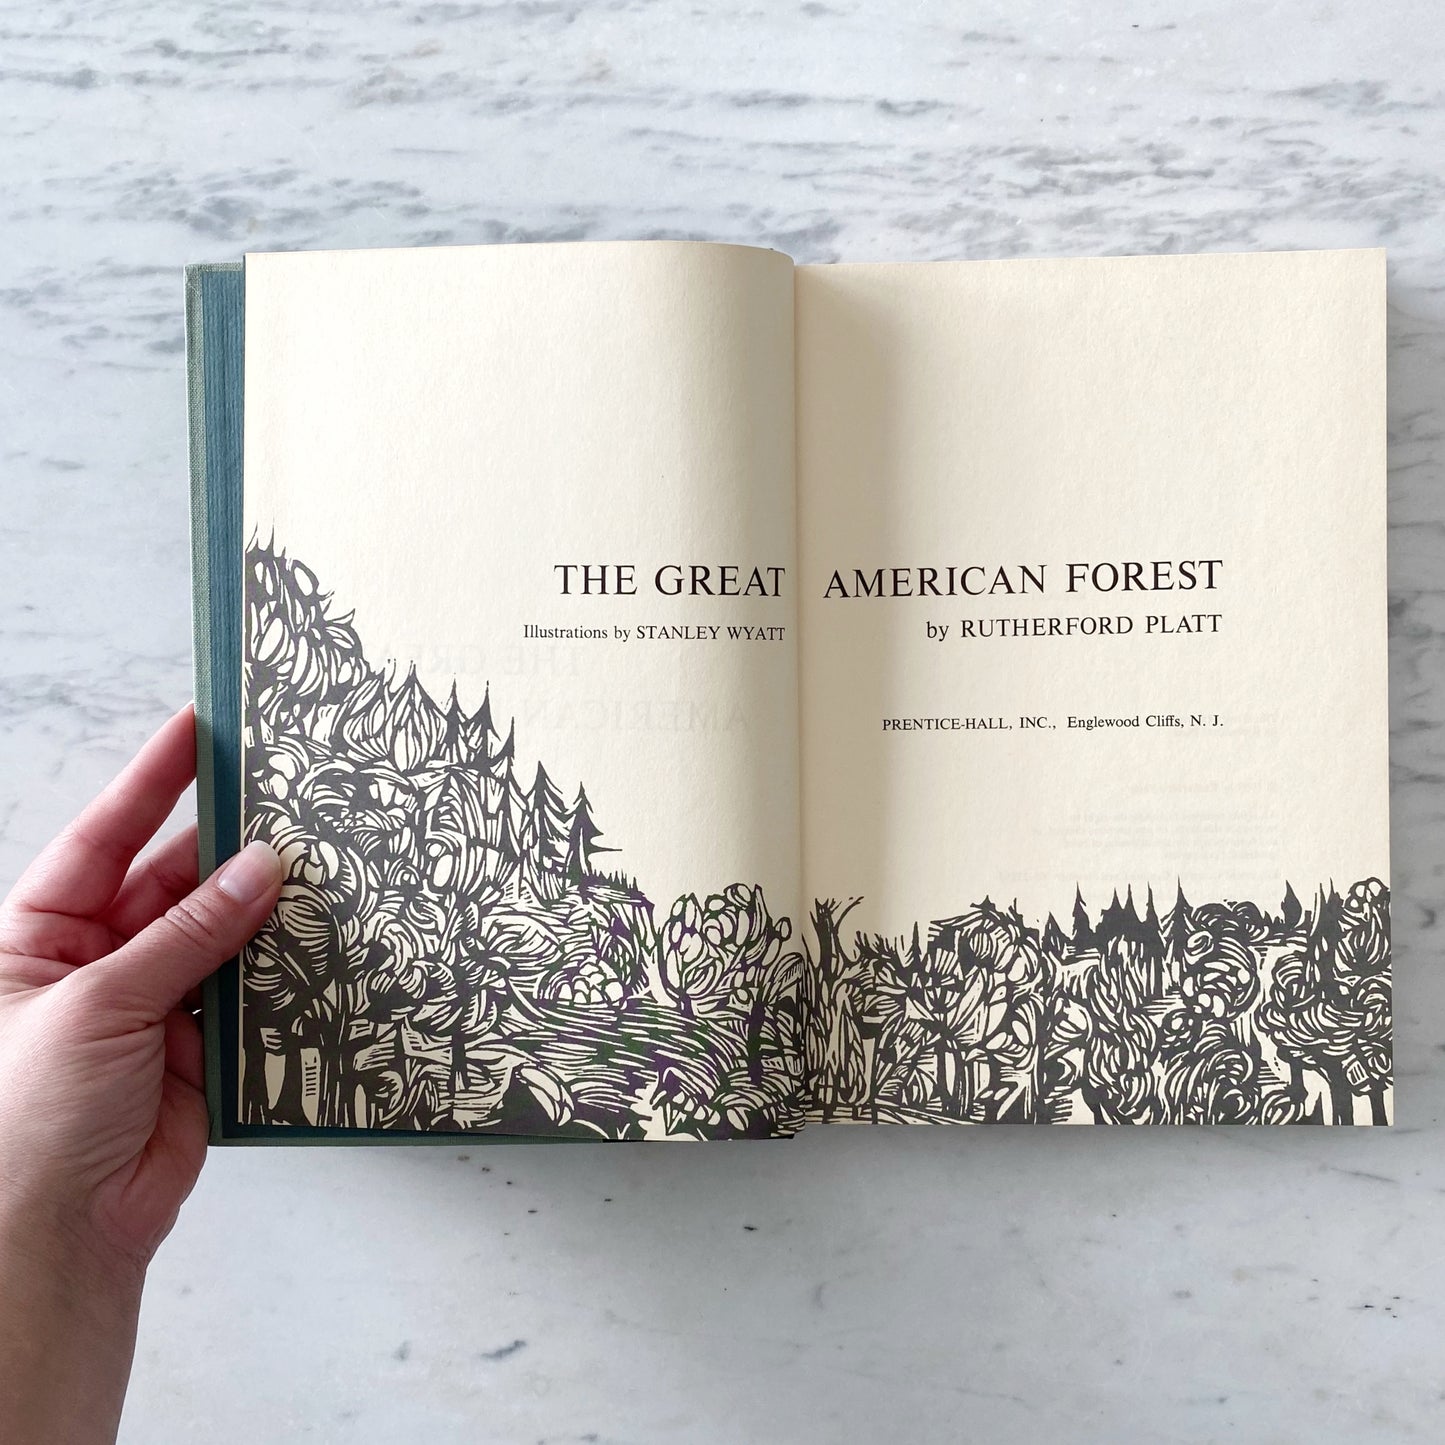 Book: The Great American Forest (1965)